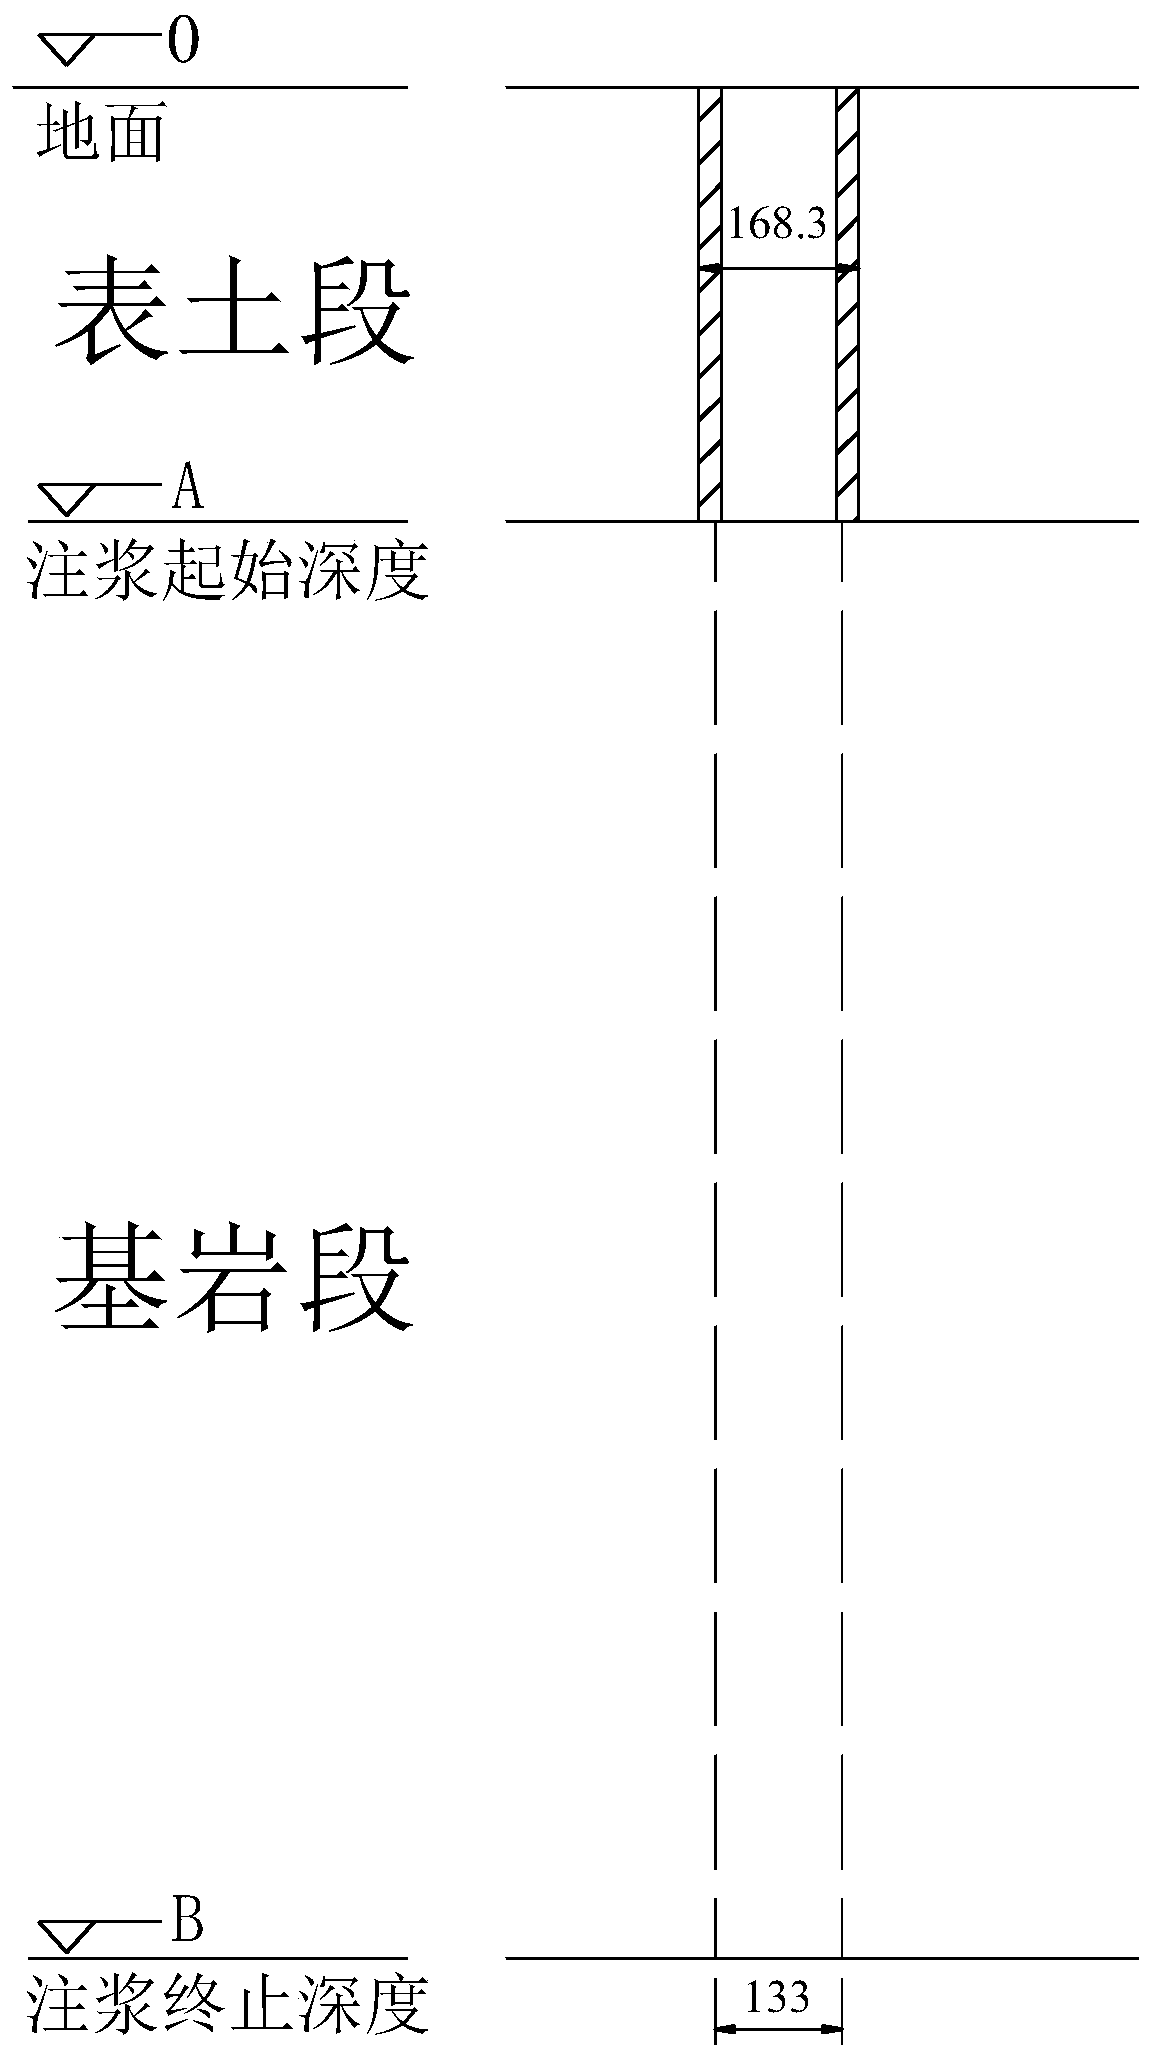 Ground pre-grouting method for small-section high shaft in complex stratum